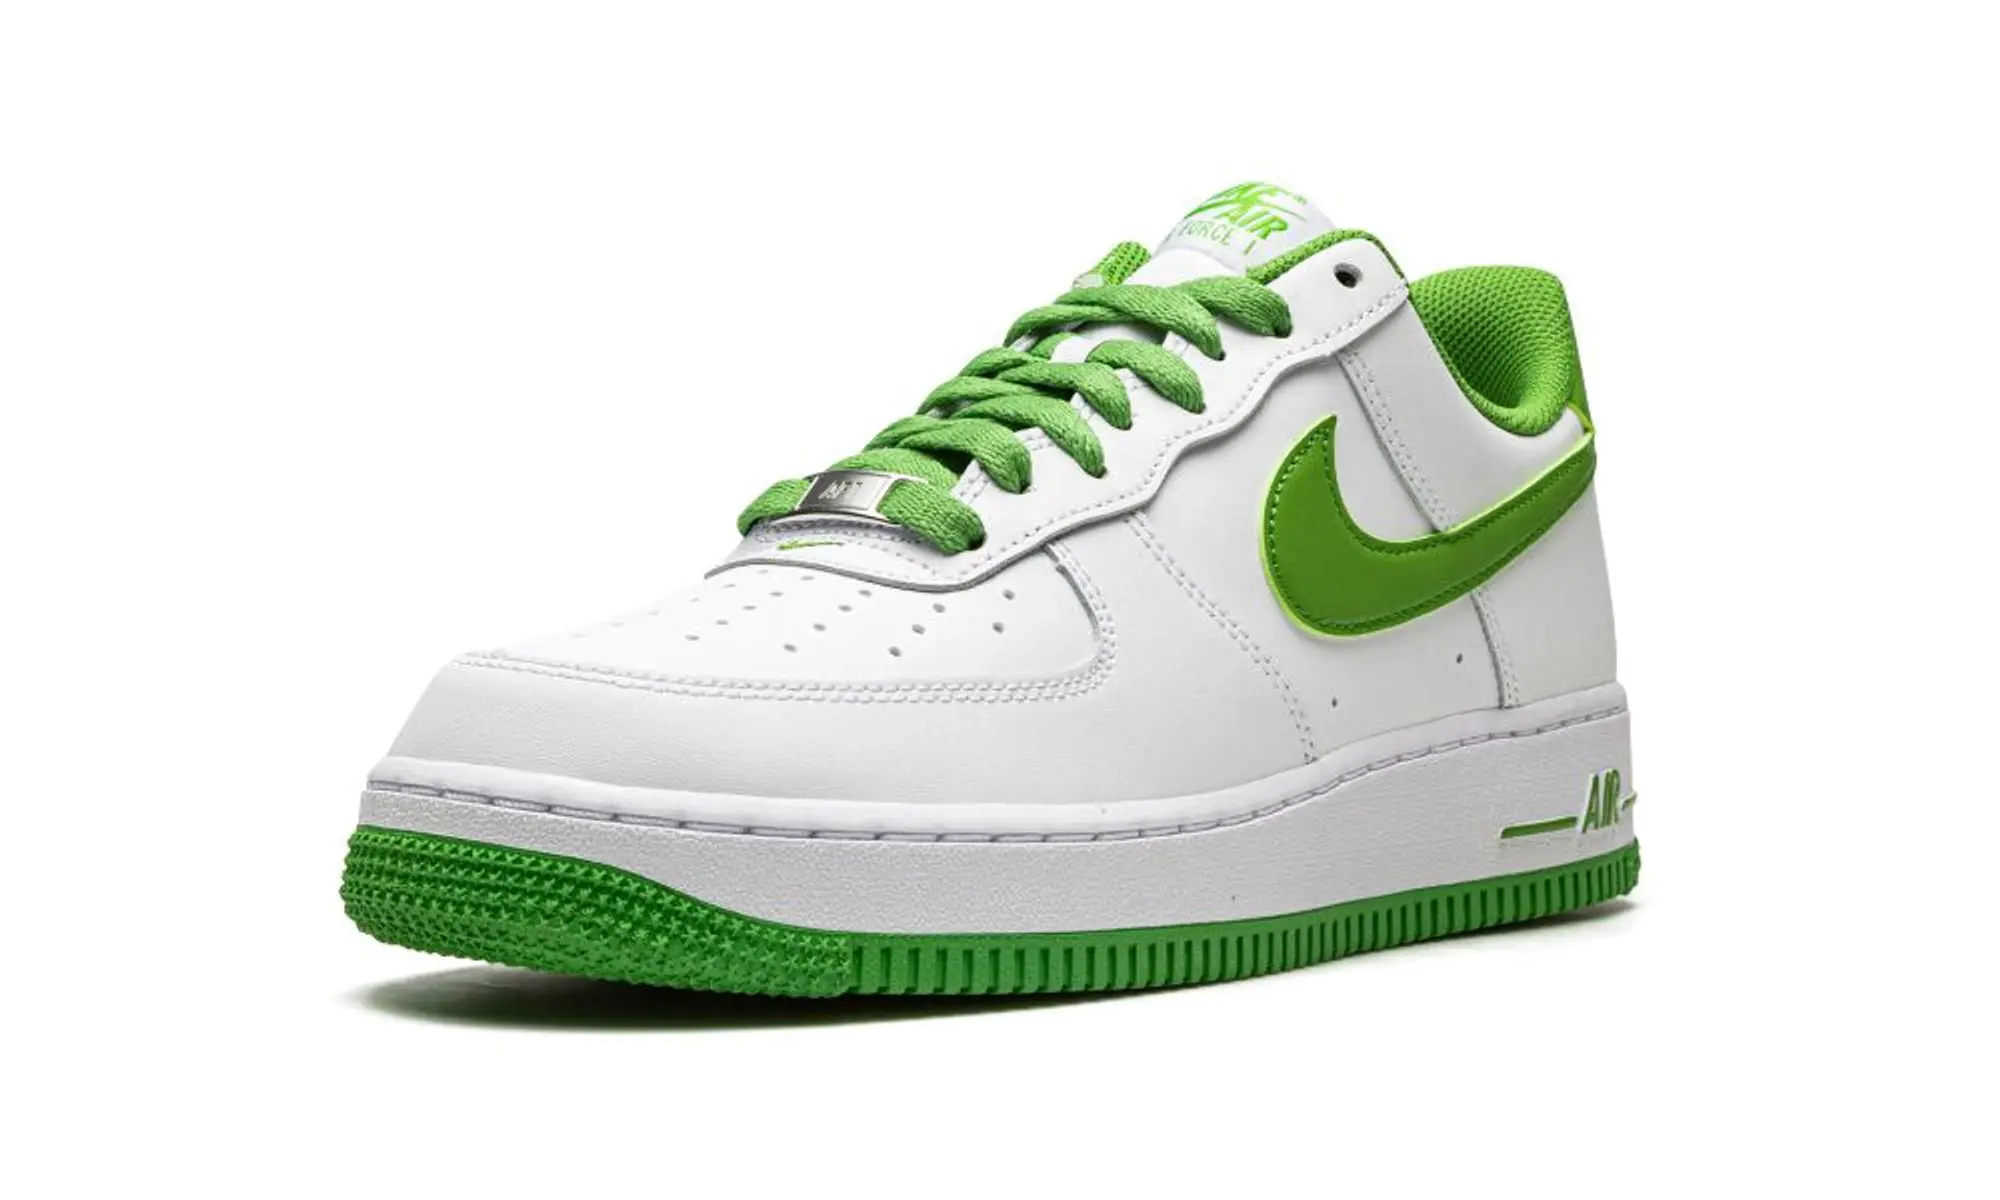 Nike Air Force 1 '07 Chlorophyll Shoes